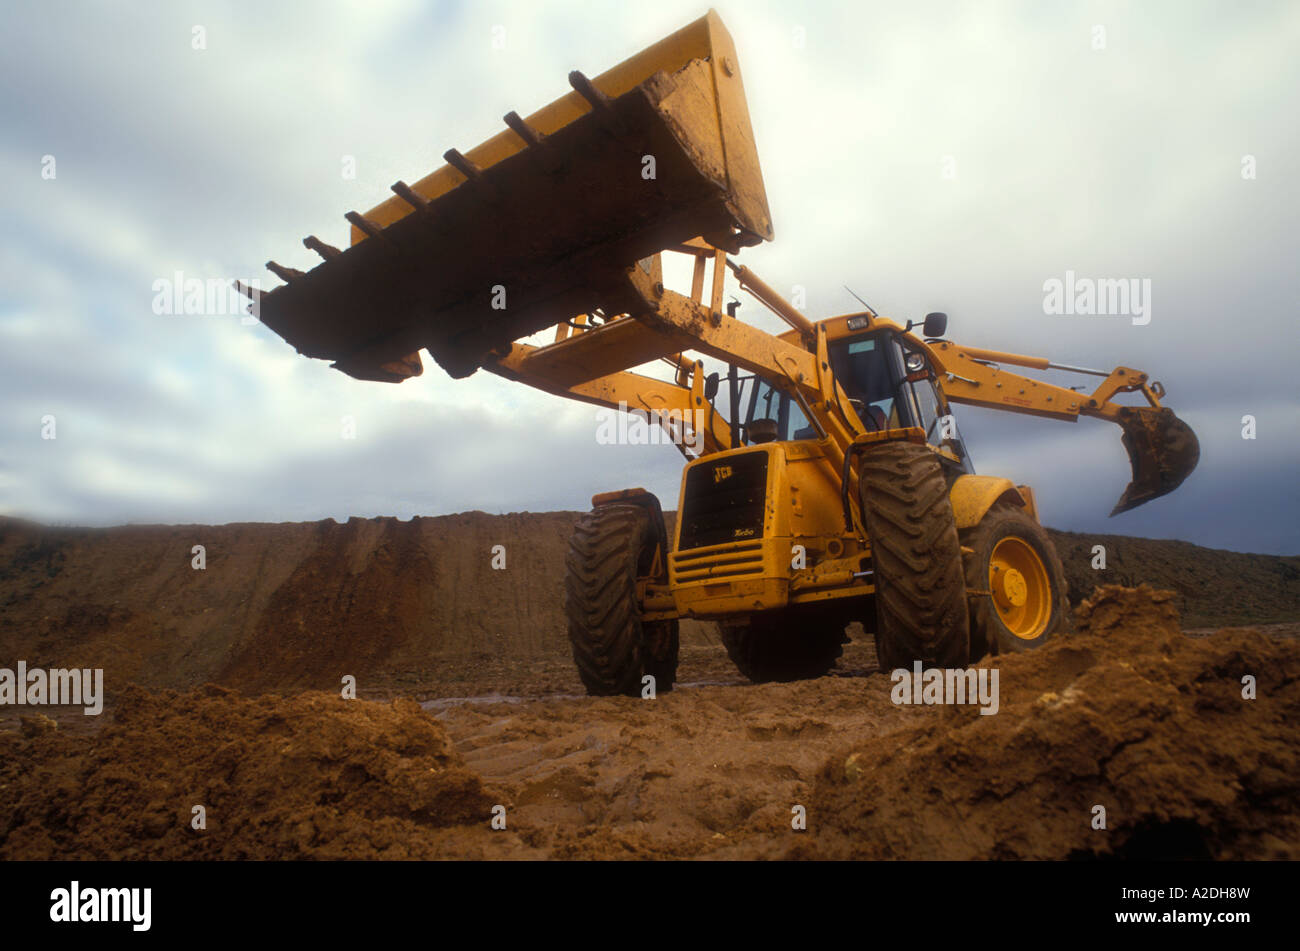 JCB digger working on site Stock Photo